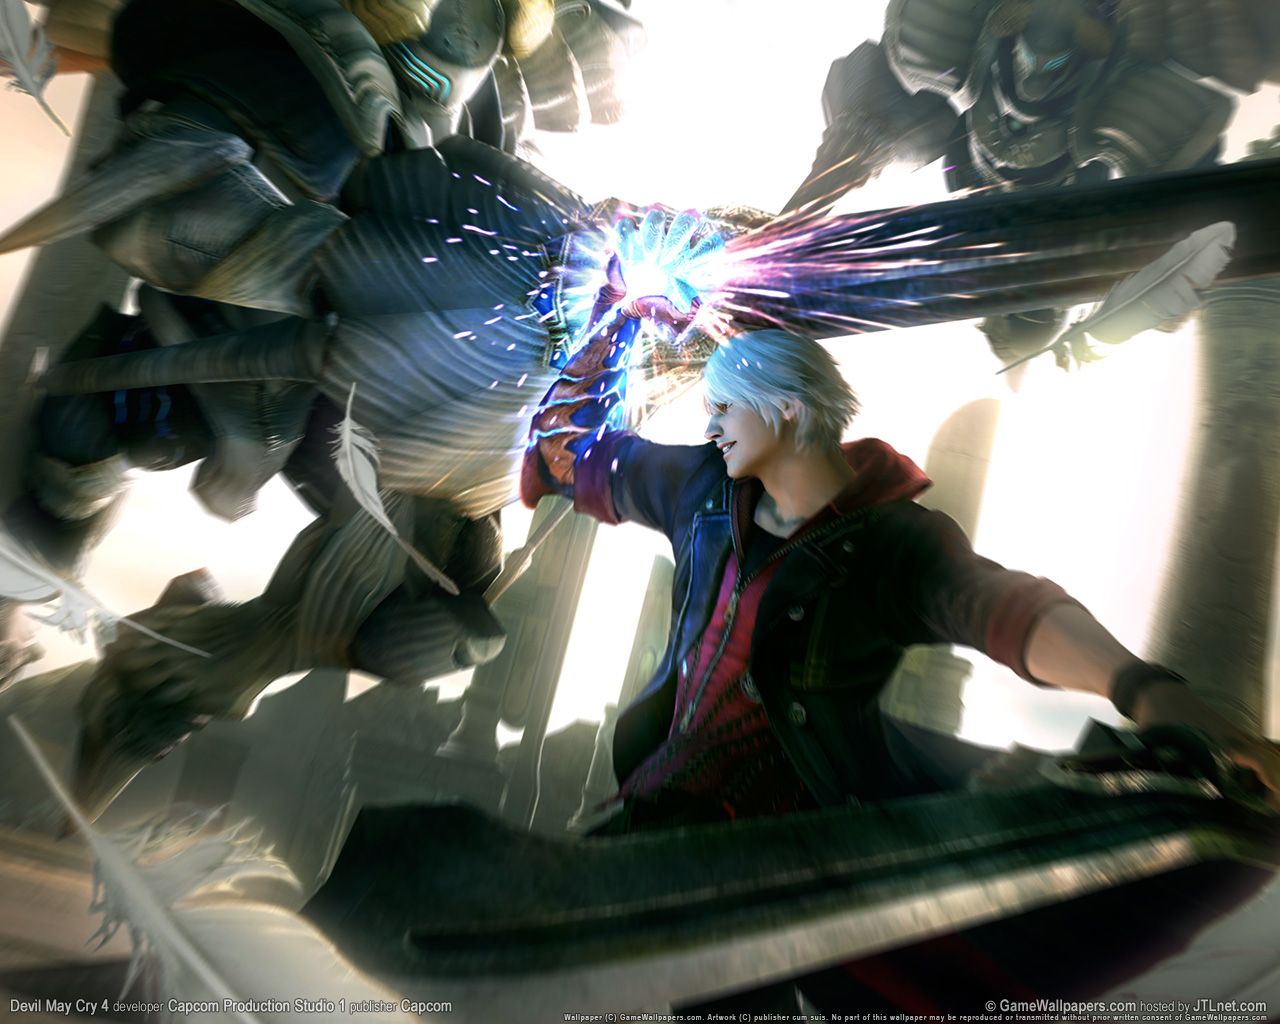 Free Devil May Cry 4 Poster Wallpapers - HD Wallpapers 57181